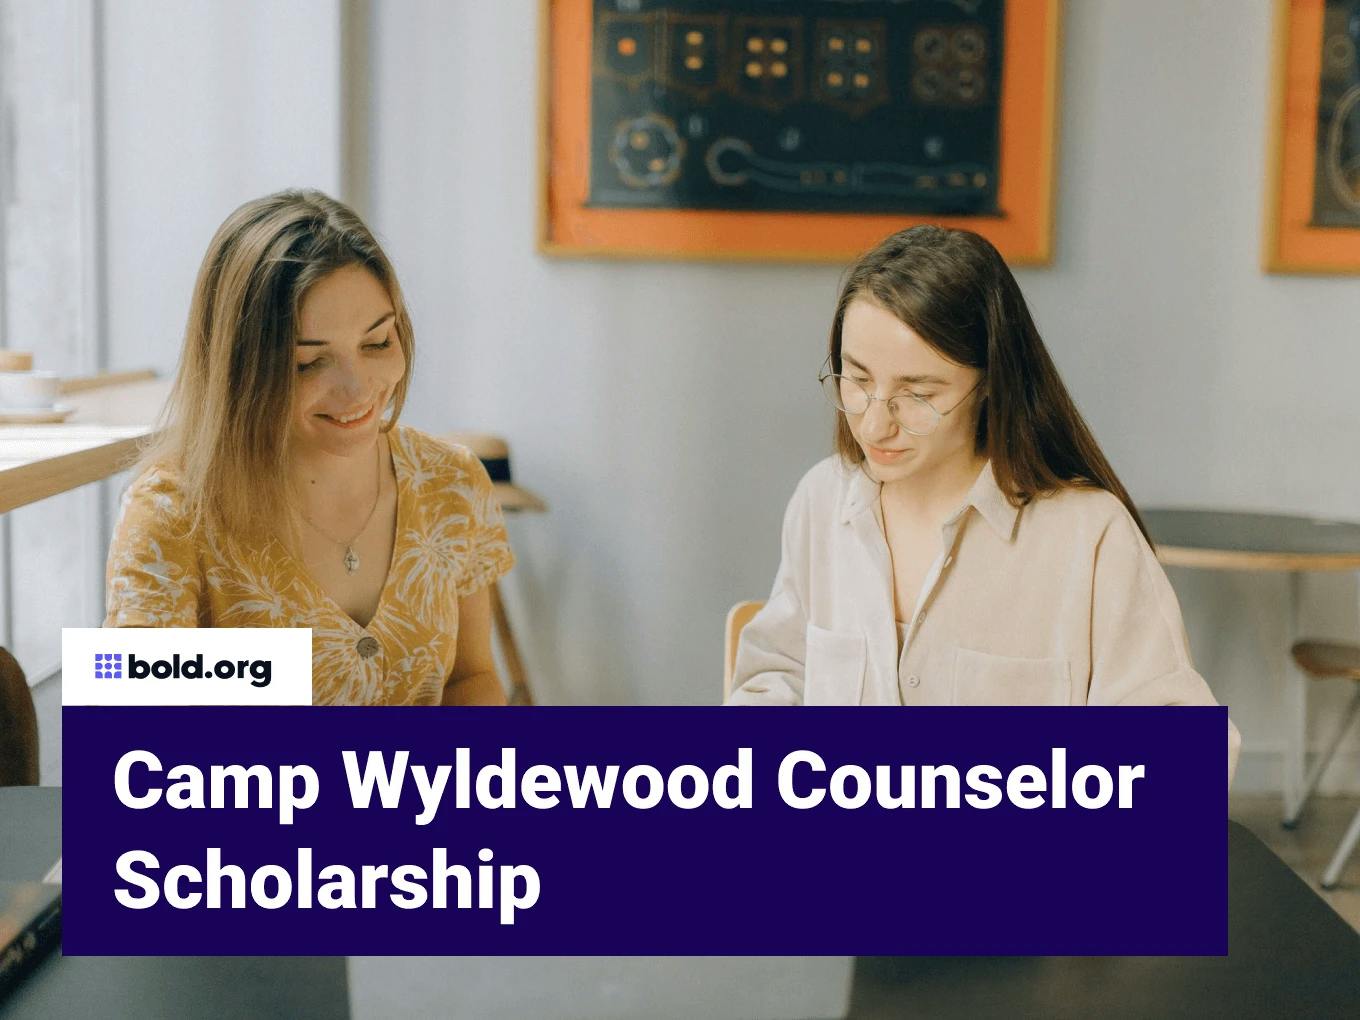 Camp Wyldewood Counselor Scholarship